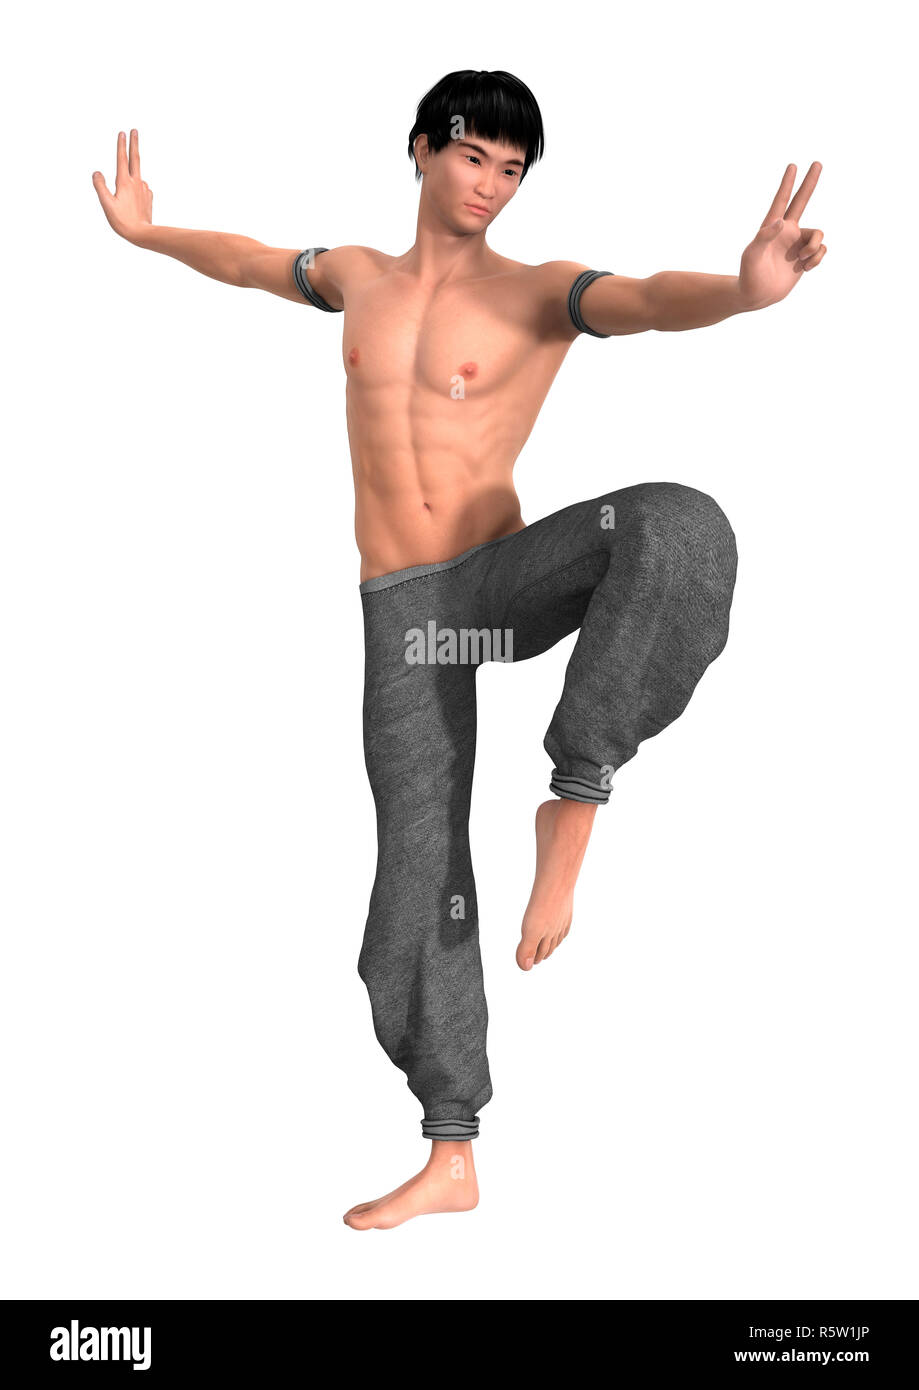 3D Rendering Fighting Monk on White Stock Photo